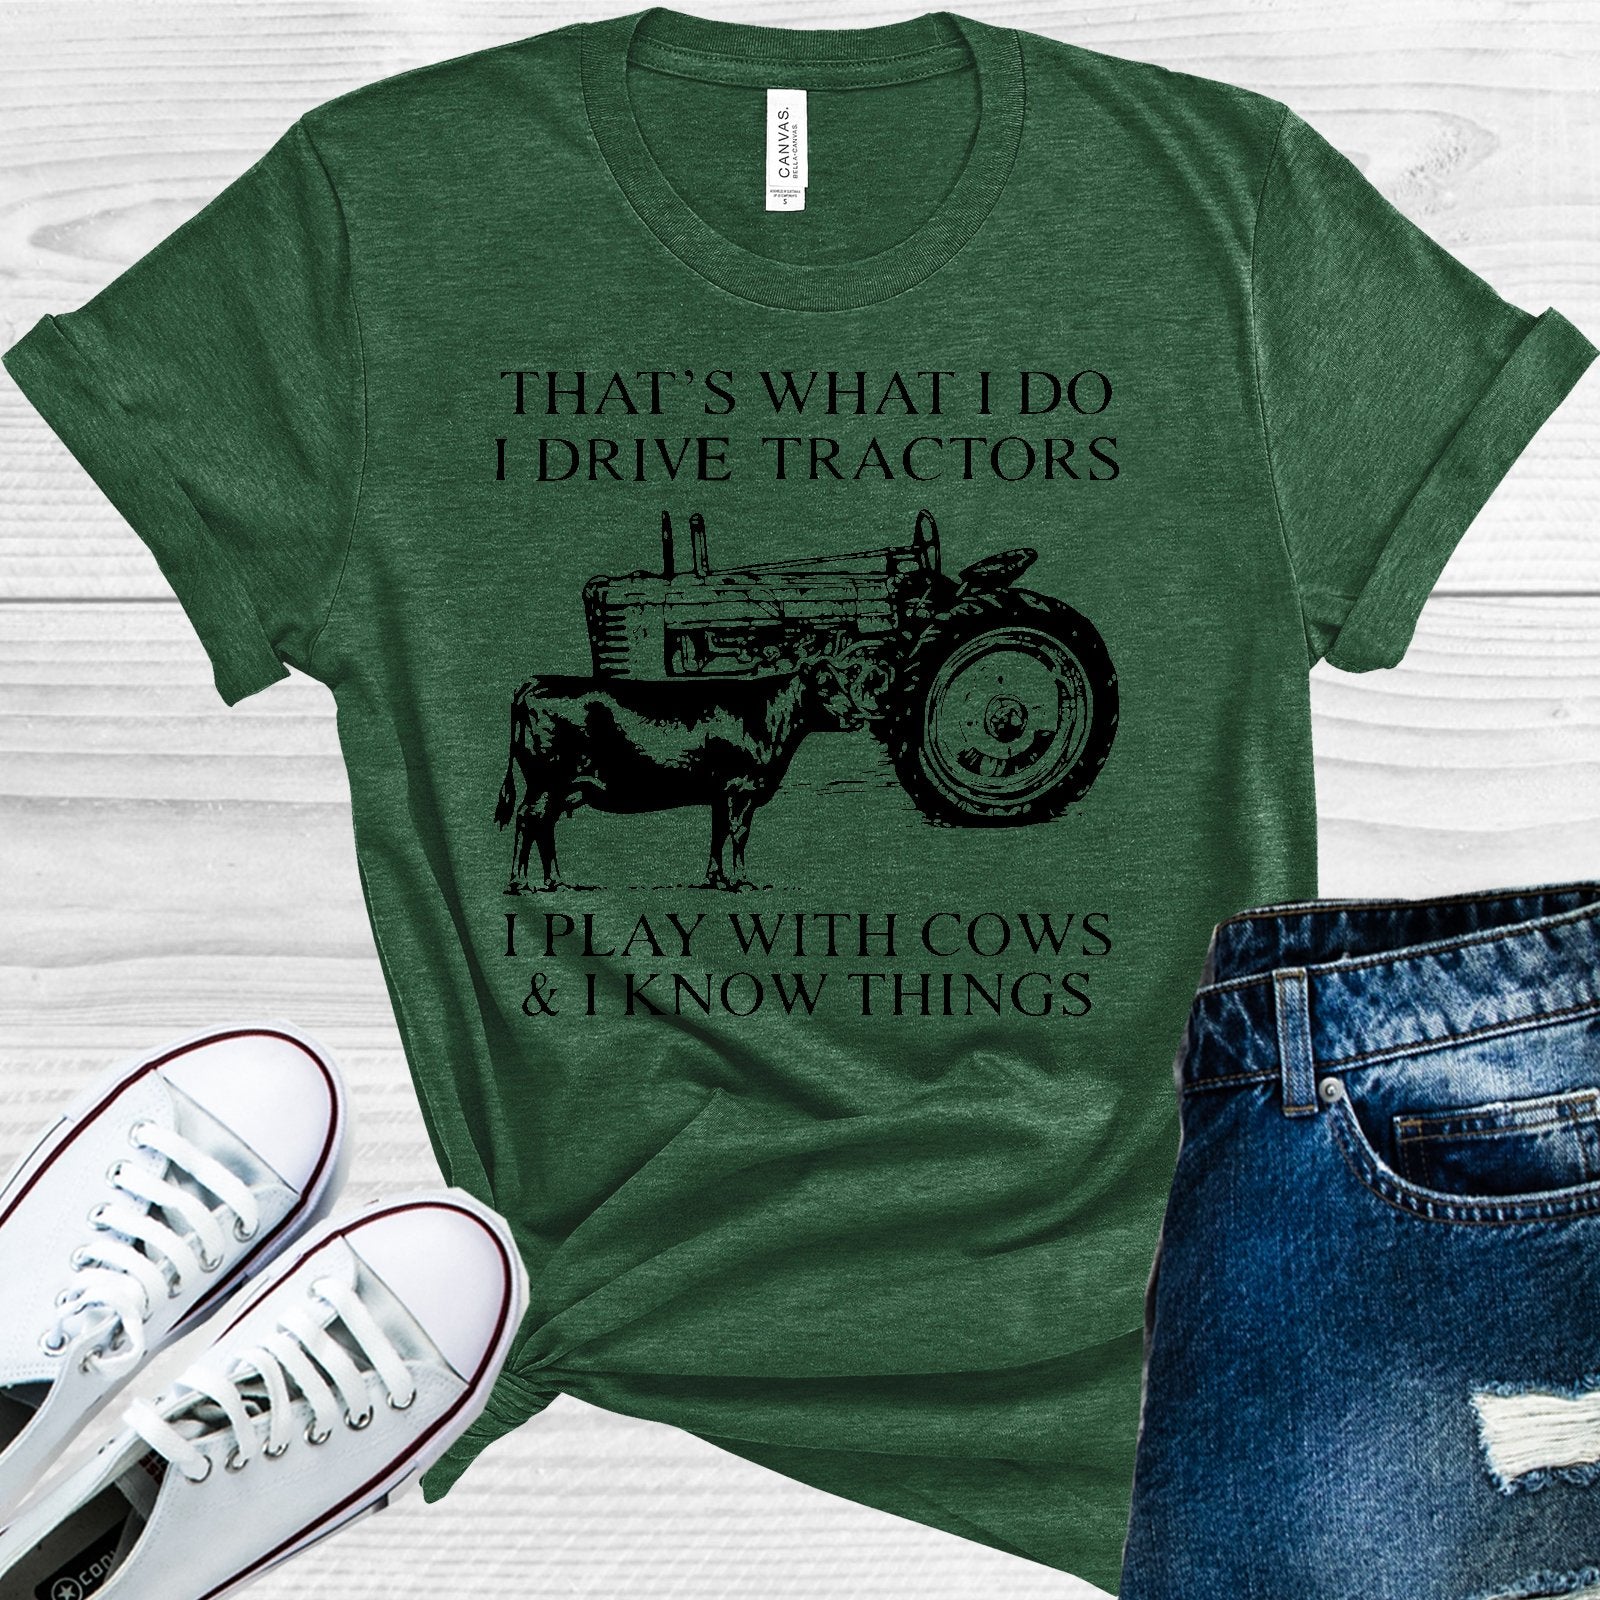 Thats What I Do Drive Tractors Play With Cows And Know Things Graphic Tee Graphic Tee